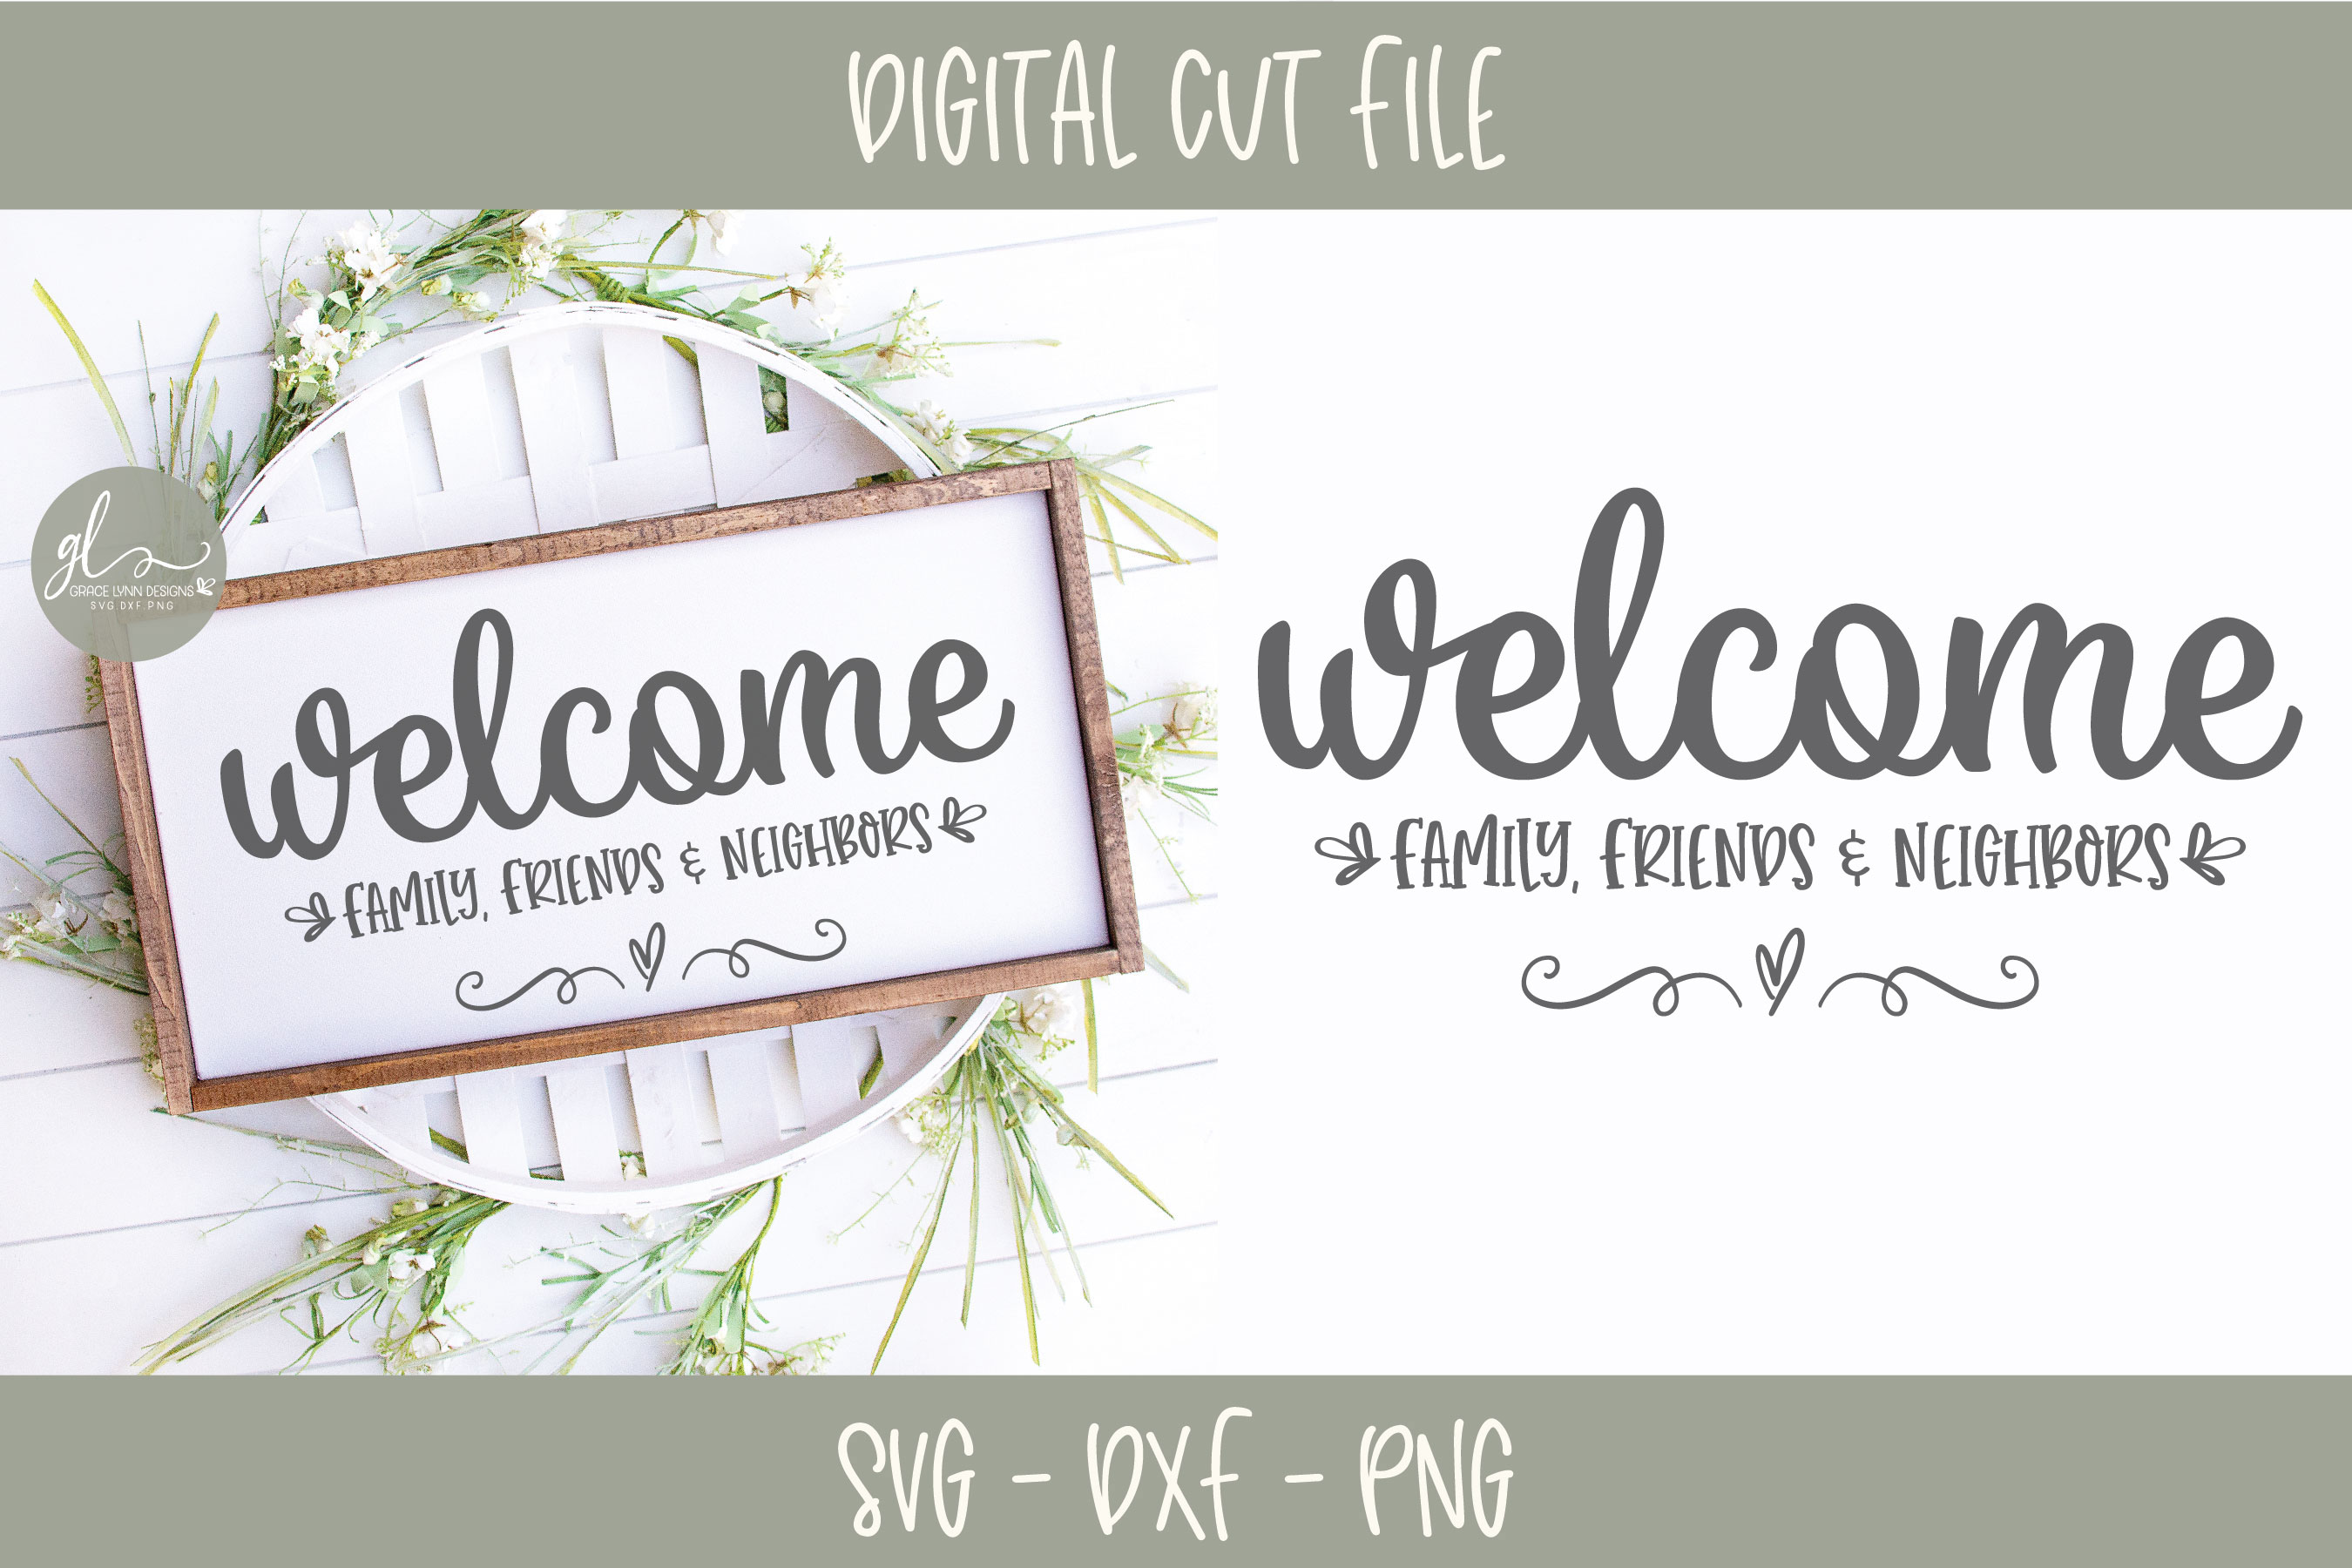 Welcome Family, Friends & Neighbors - SVG Cut File